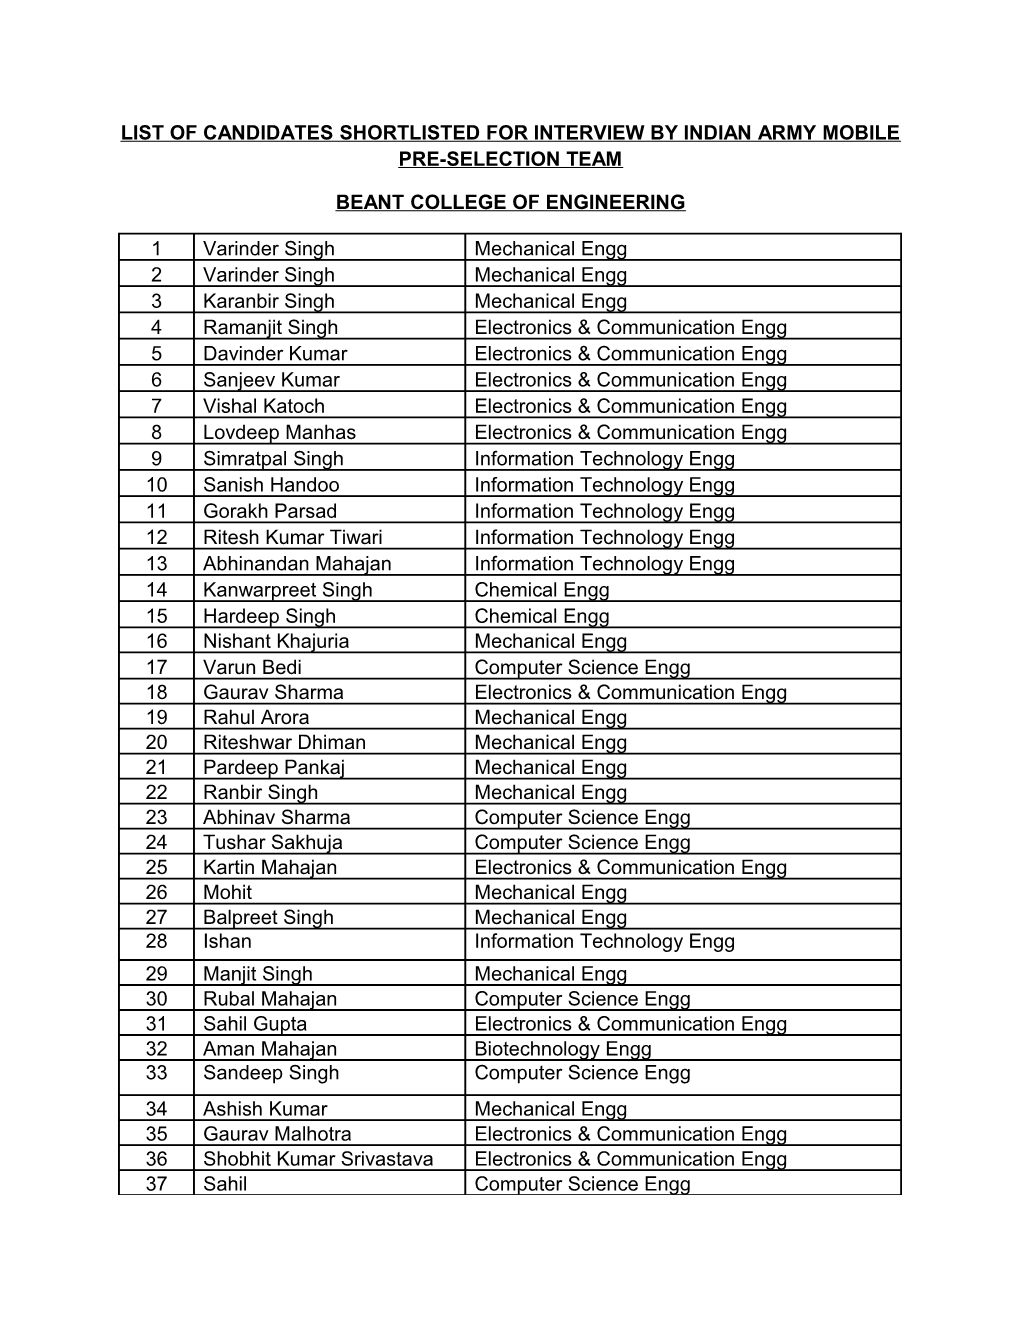 List of Candidates Shortlisted for Interview by Indian Army Mobile Pre-Selection Team